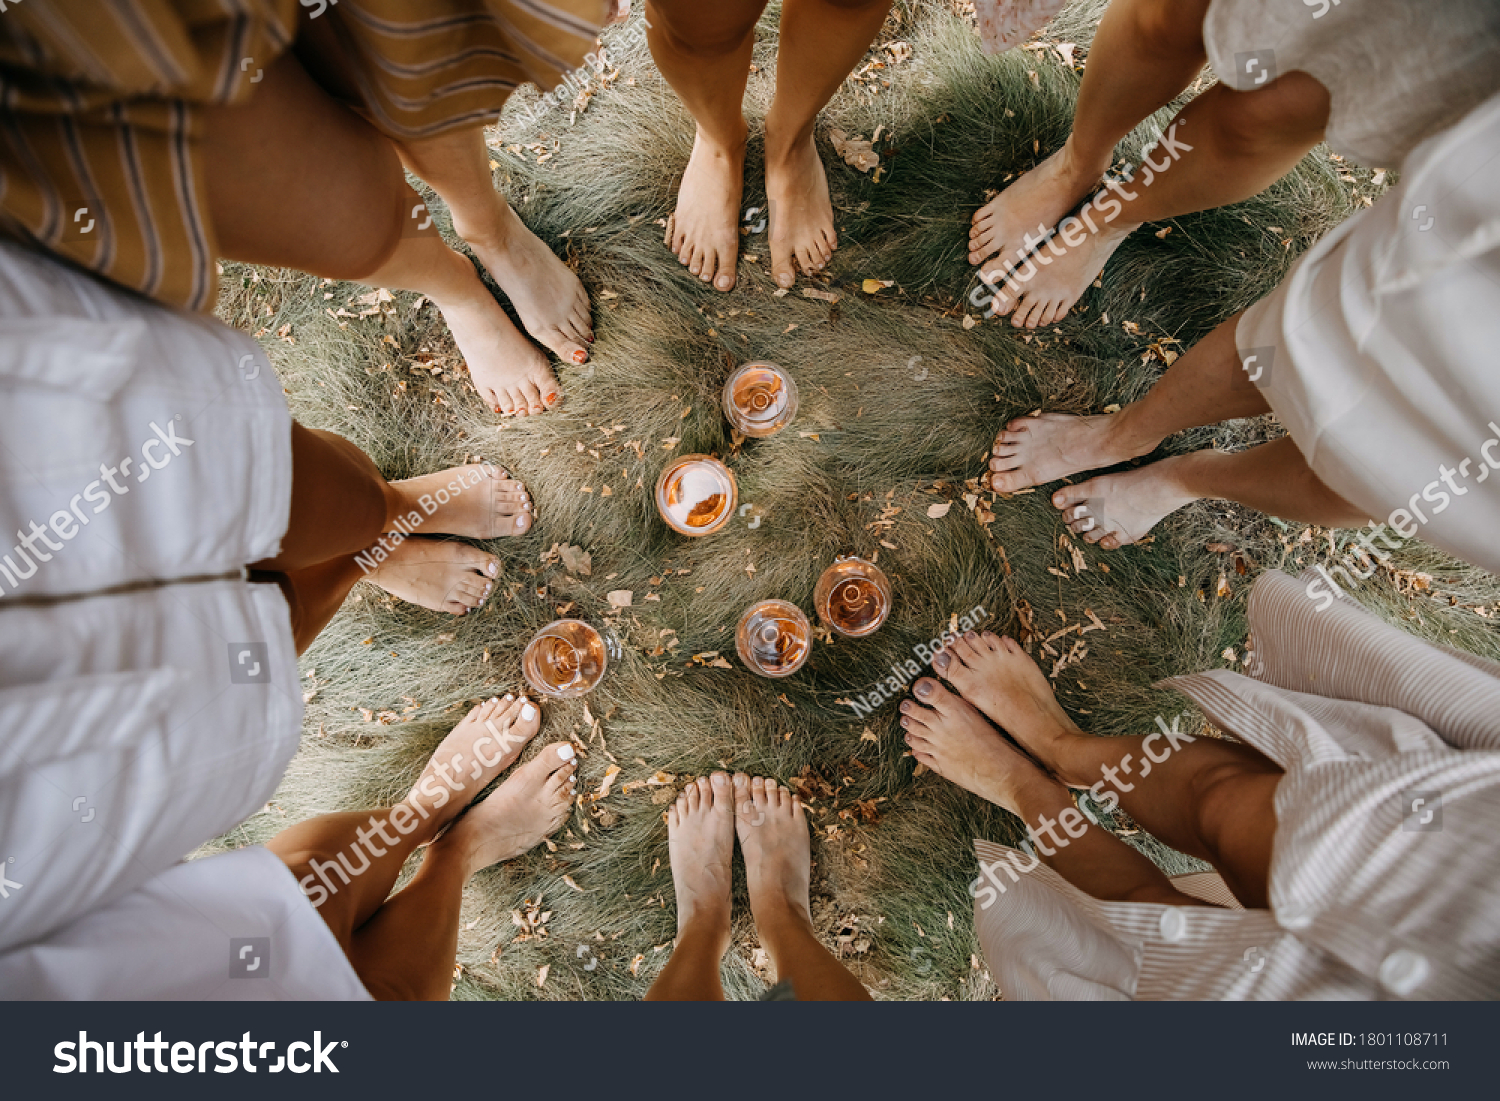 Female barefoot feet on dry grass standing in a circle with glasses of wine in the middle. #1801108711